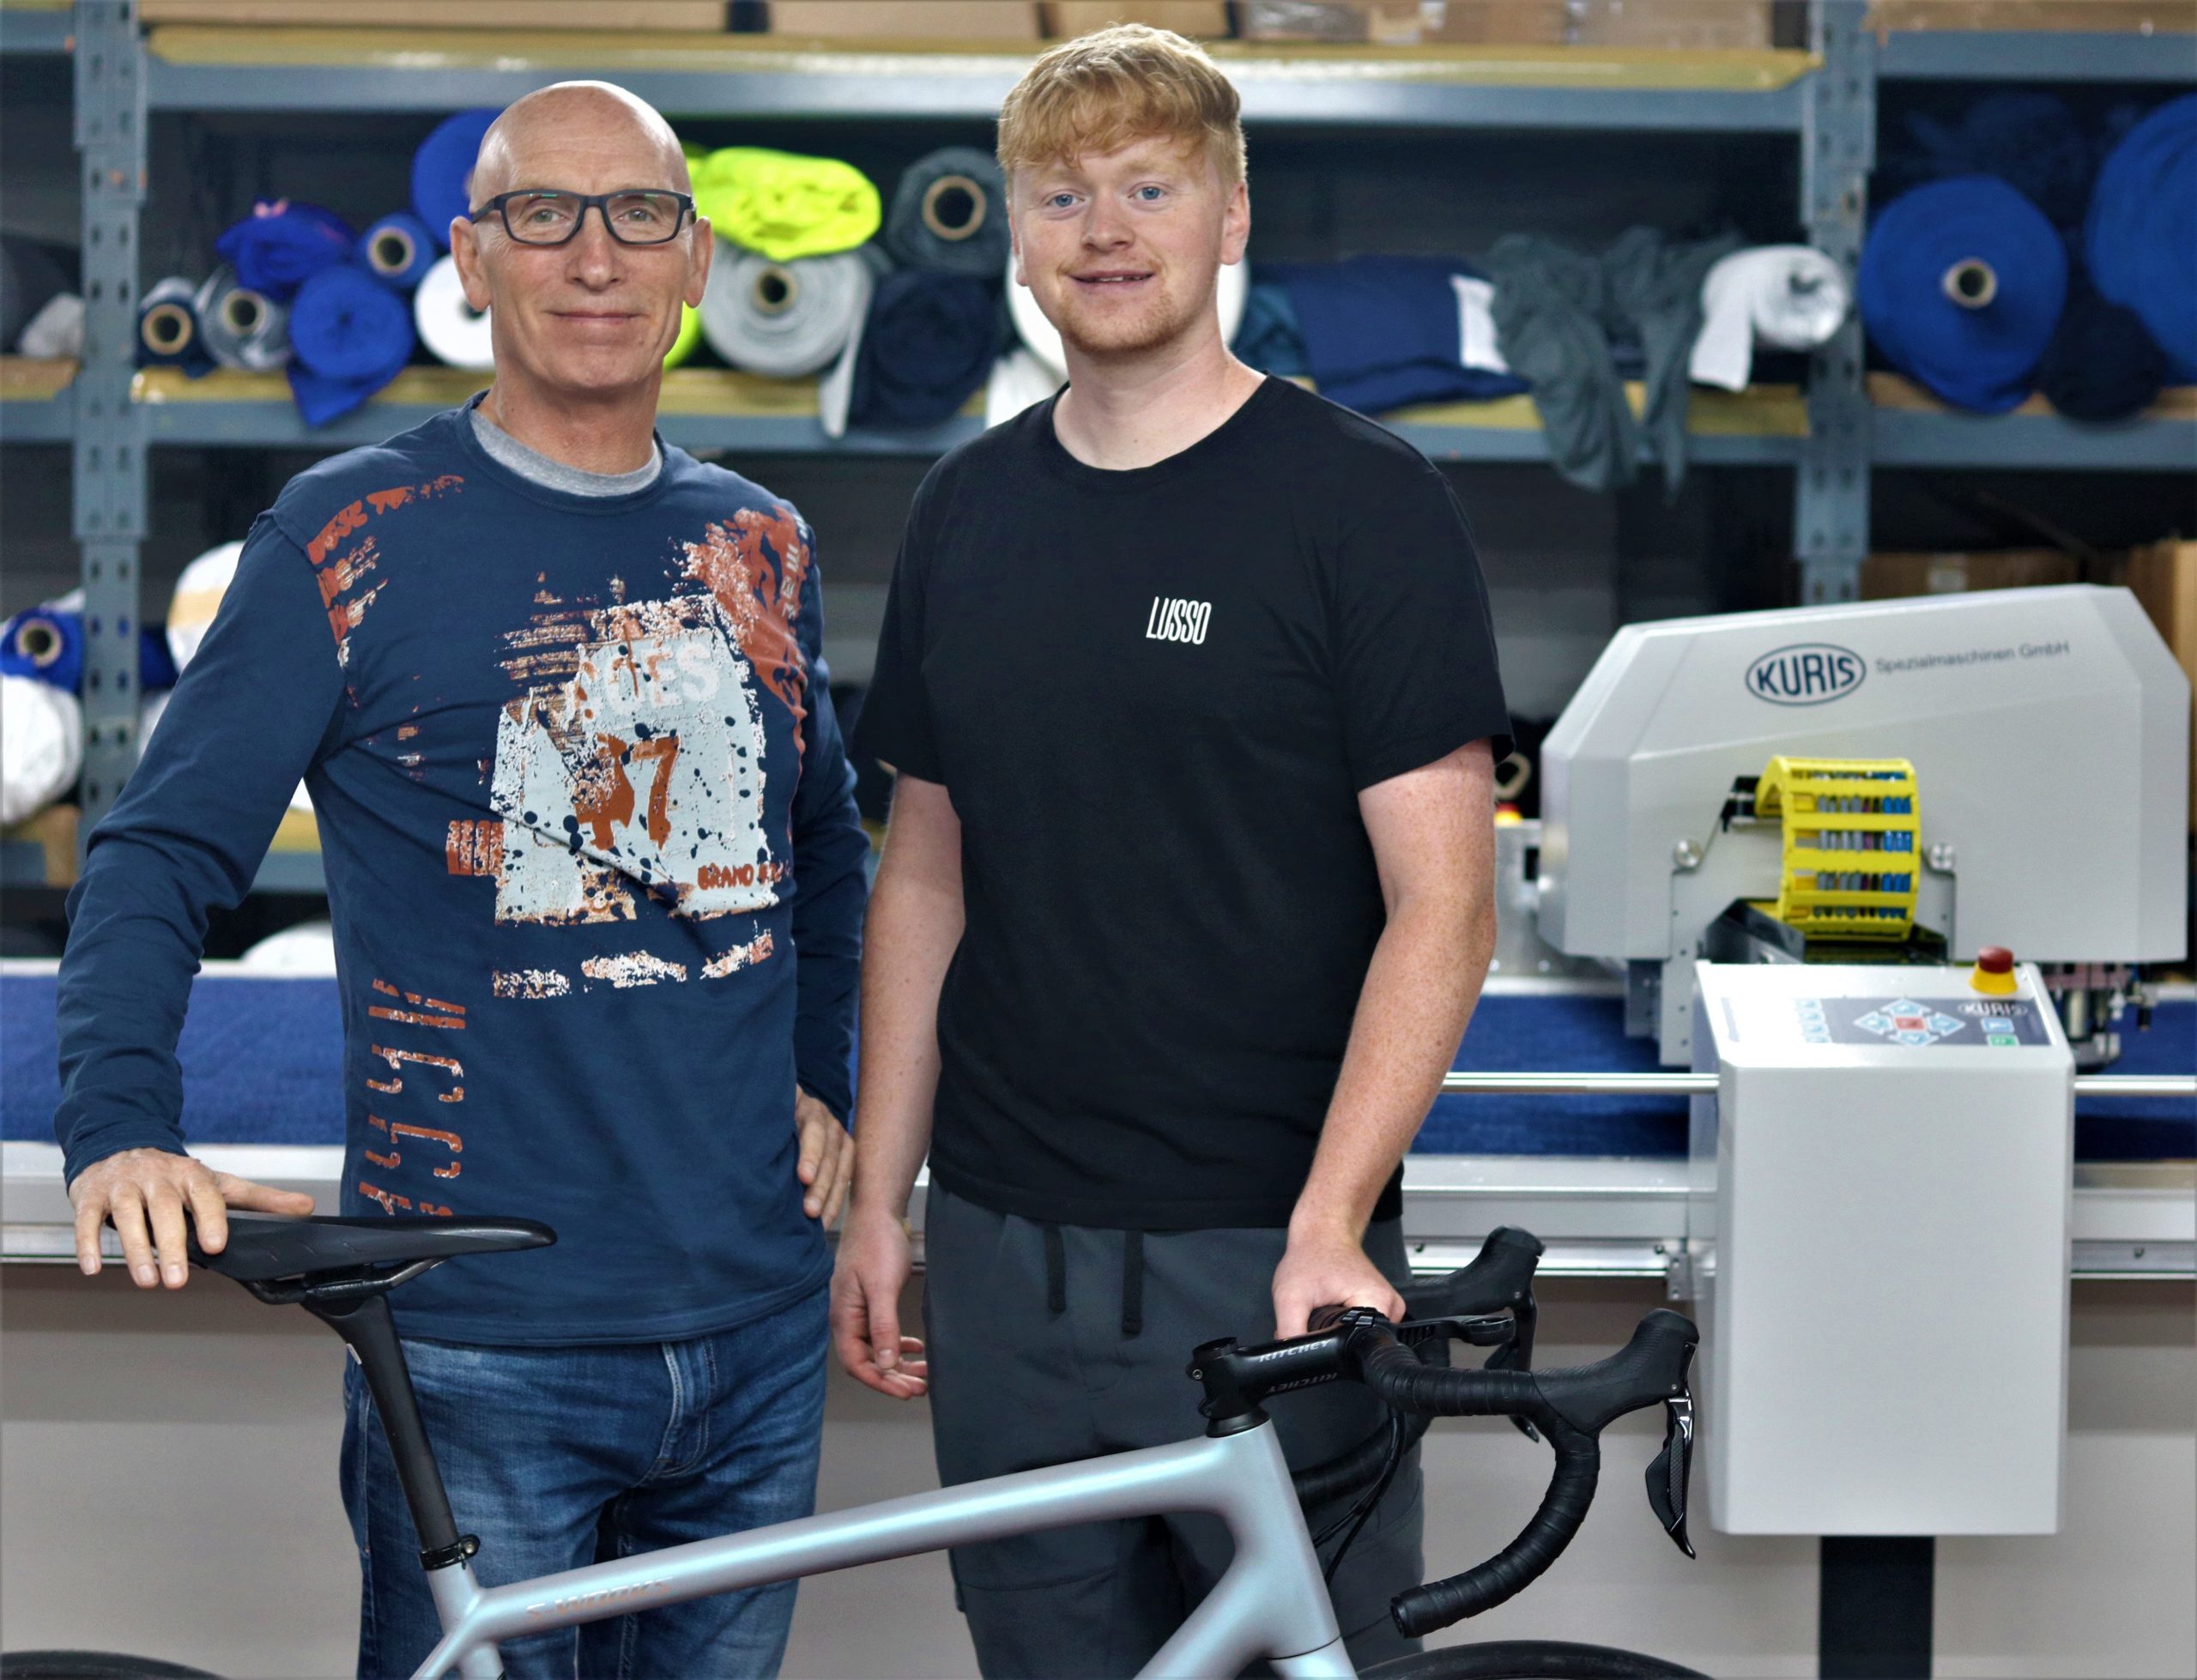 Cycle clothing manufacturer gears up for growth with Made Smarter support